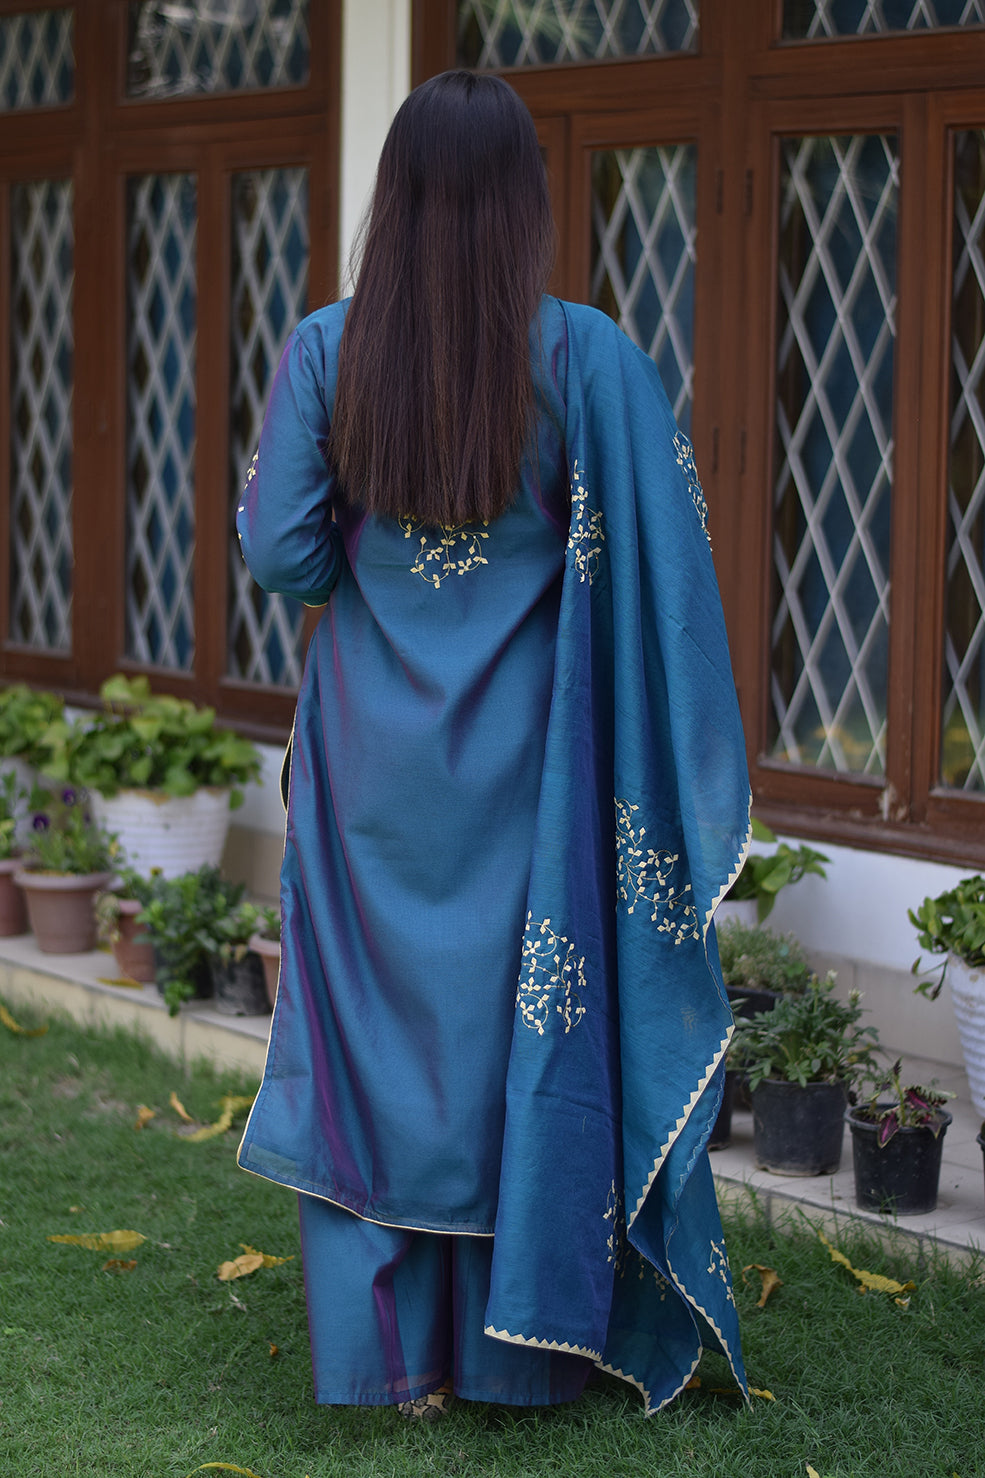 An elegant Indian woman wearing a stunning blue suit adorned with applique work.